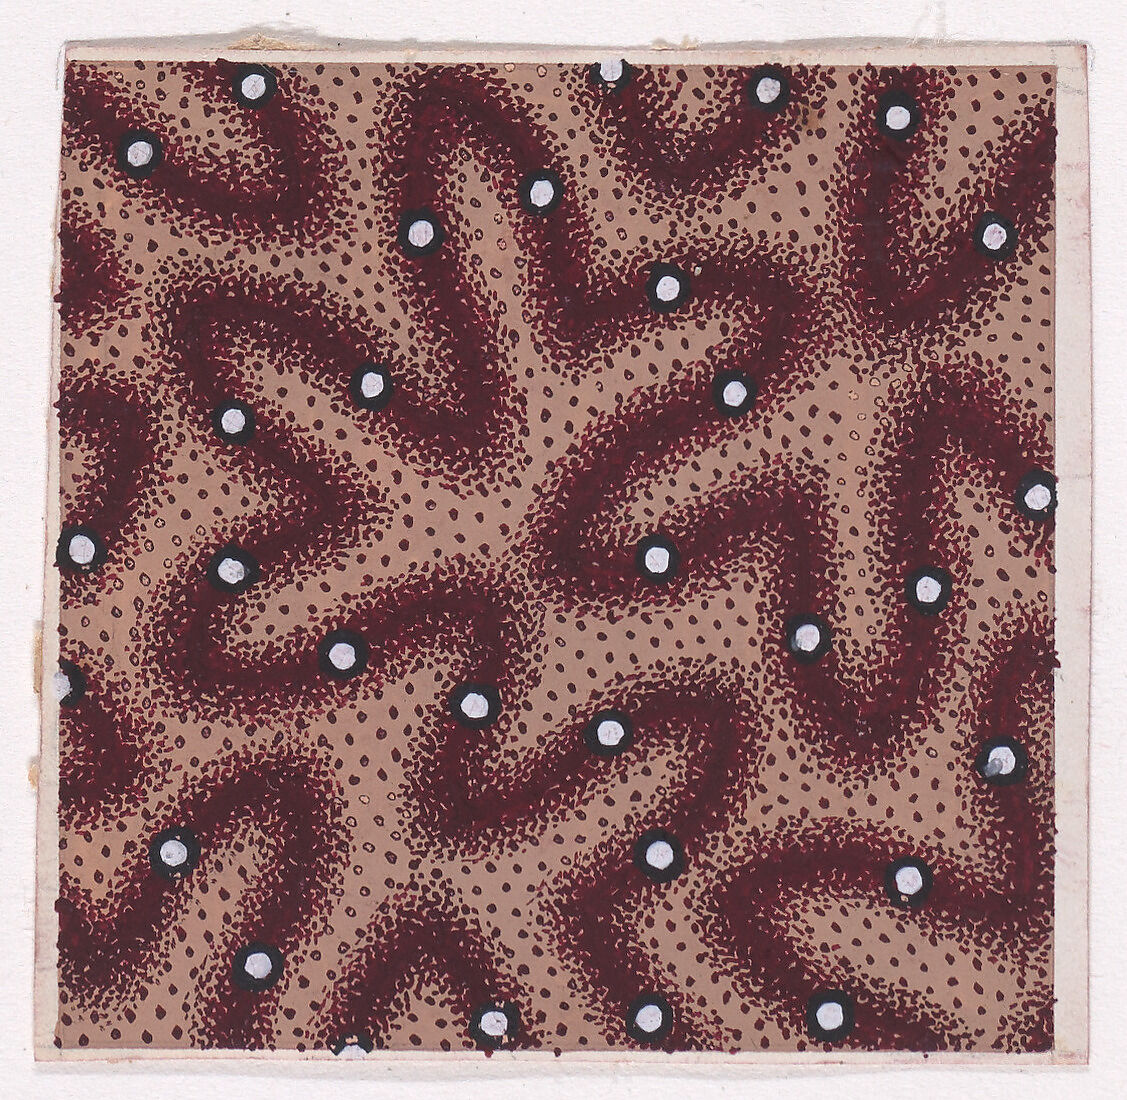 Textile Design with a Vermicular Pattern and Pearls over a Dotted Background, Anonymous, Alsatian, 19th century, Gouache 